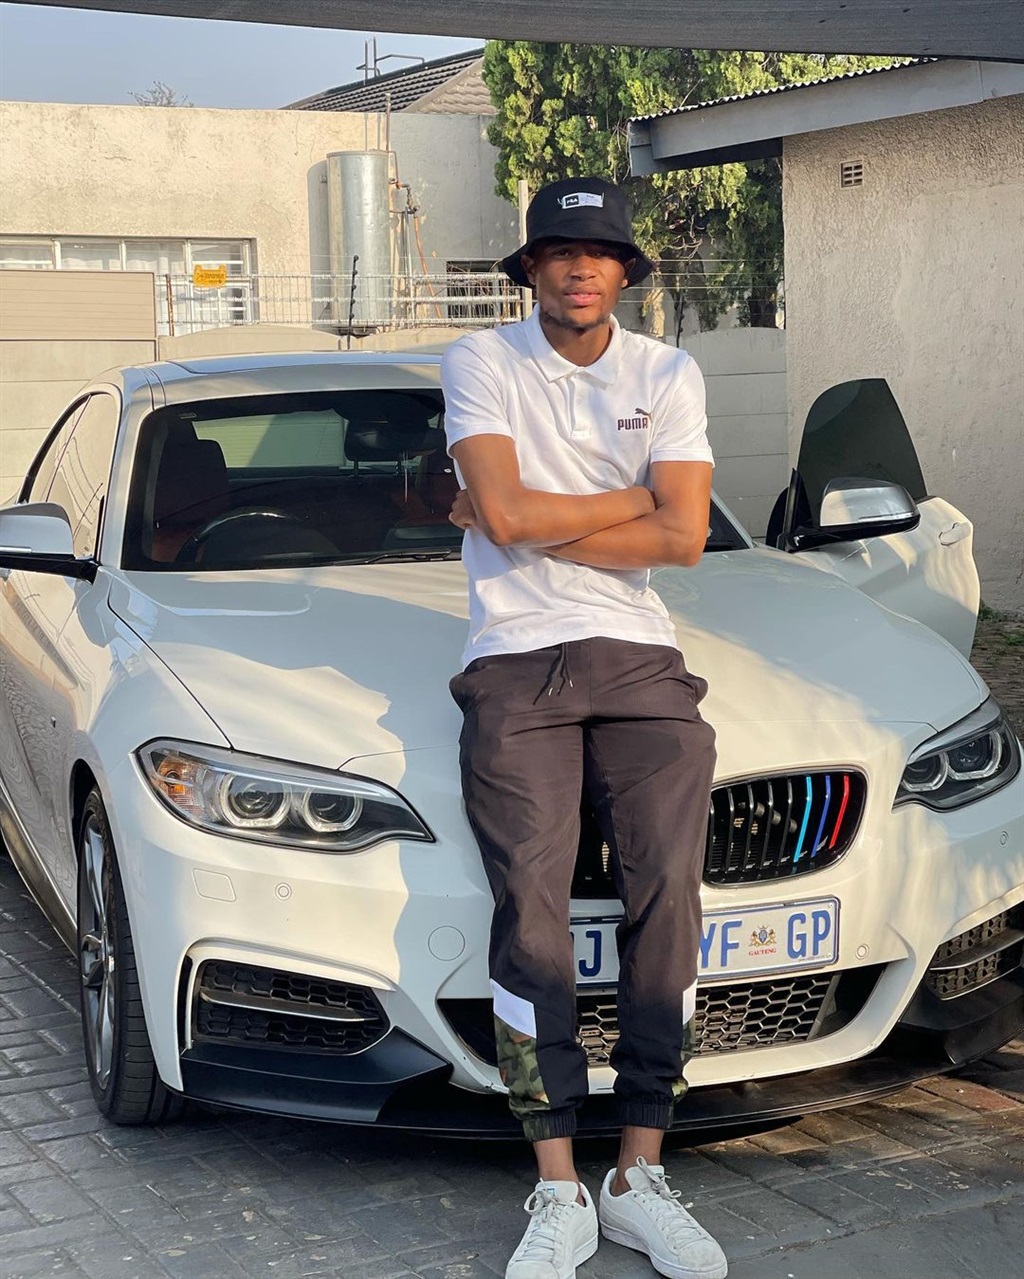 Moroka Swallows defender Bongani Sam has one of the hottest Beamers in the league!